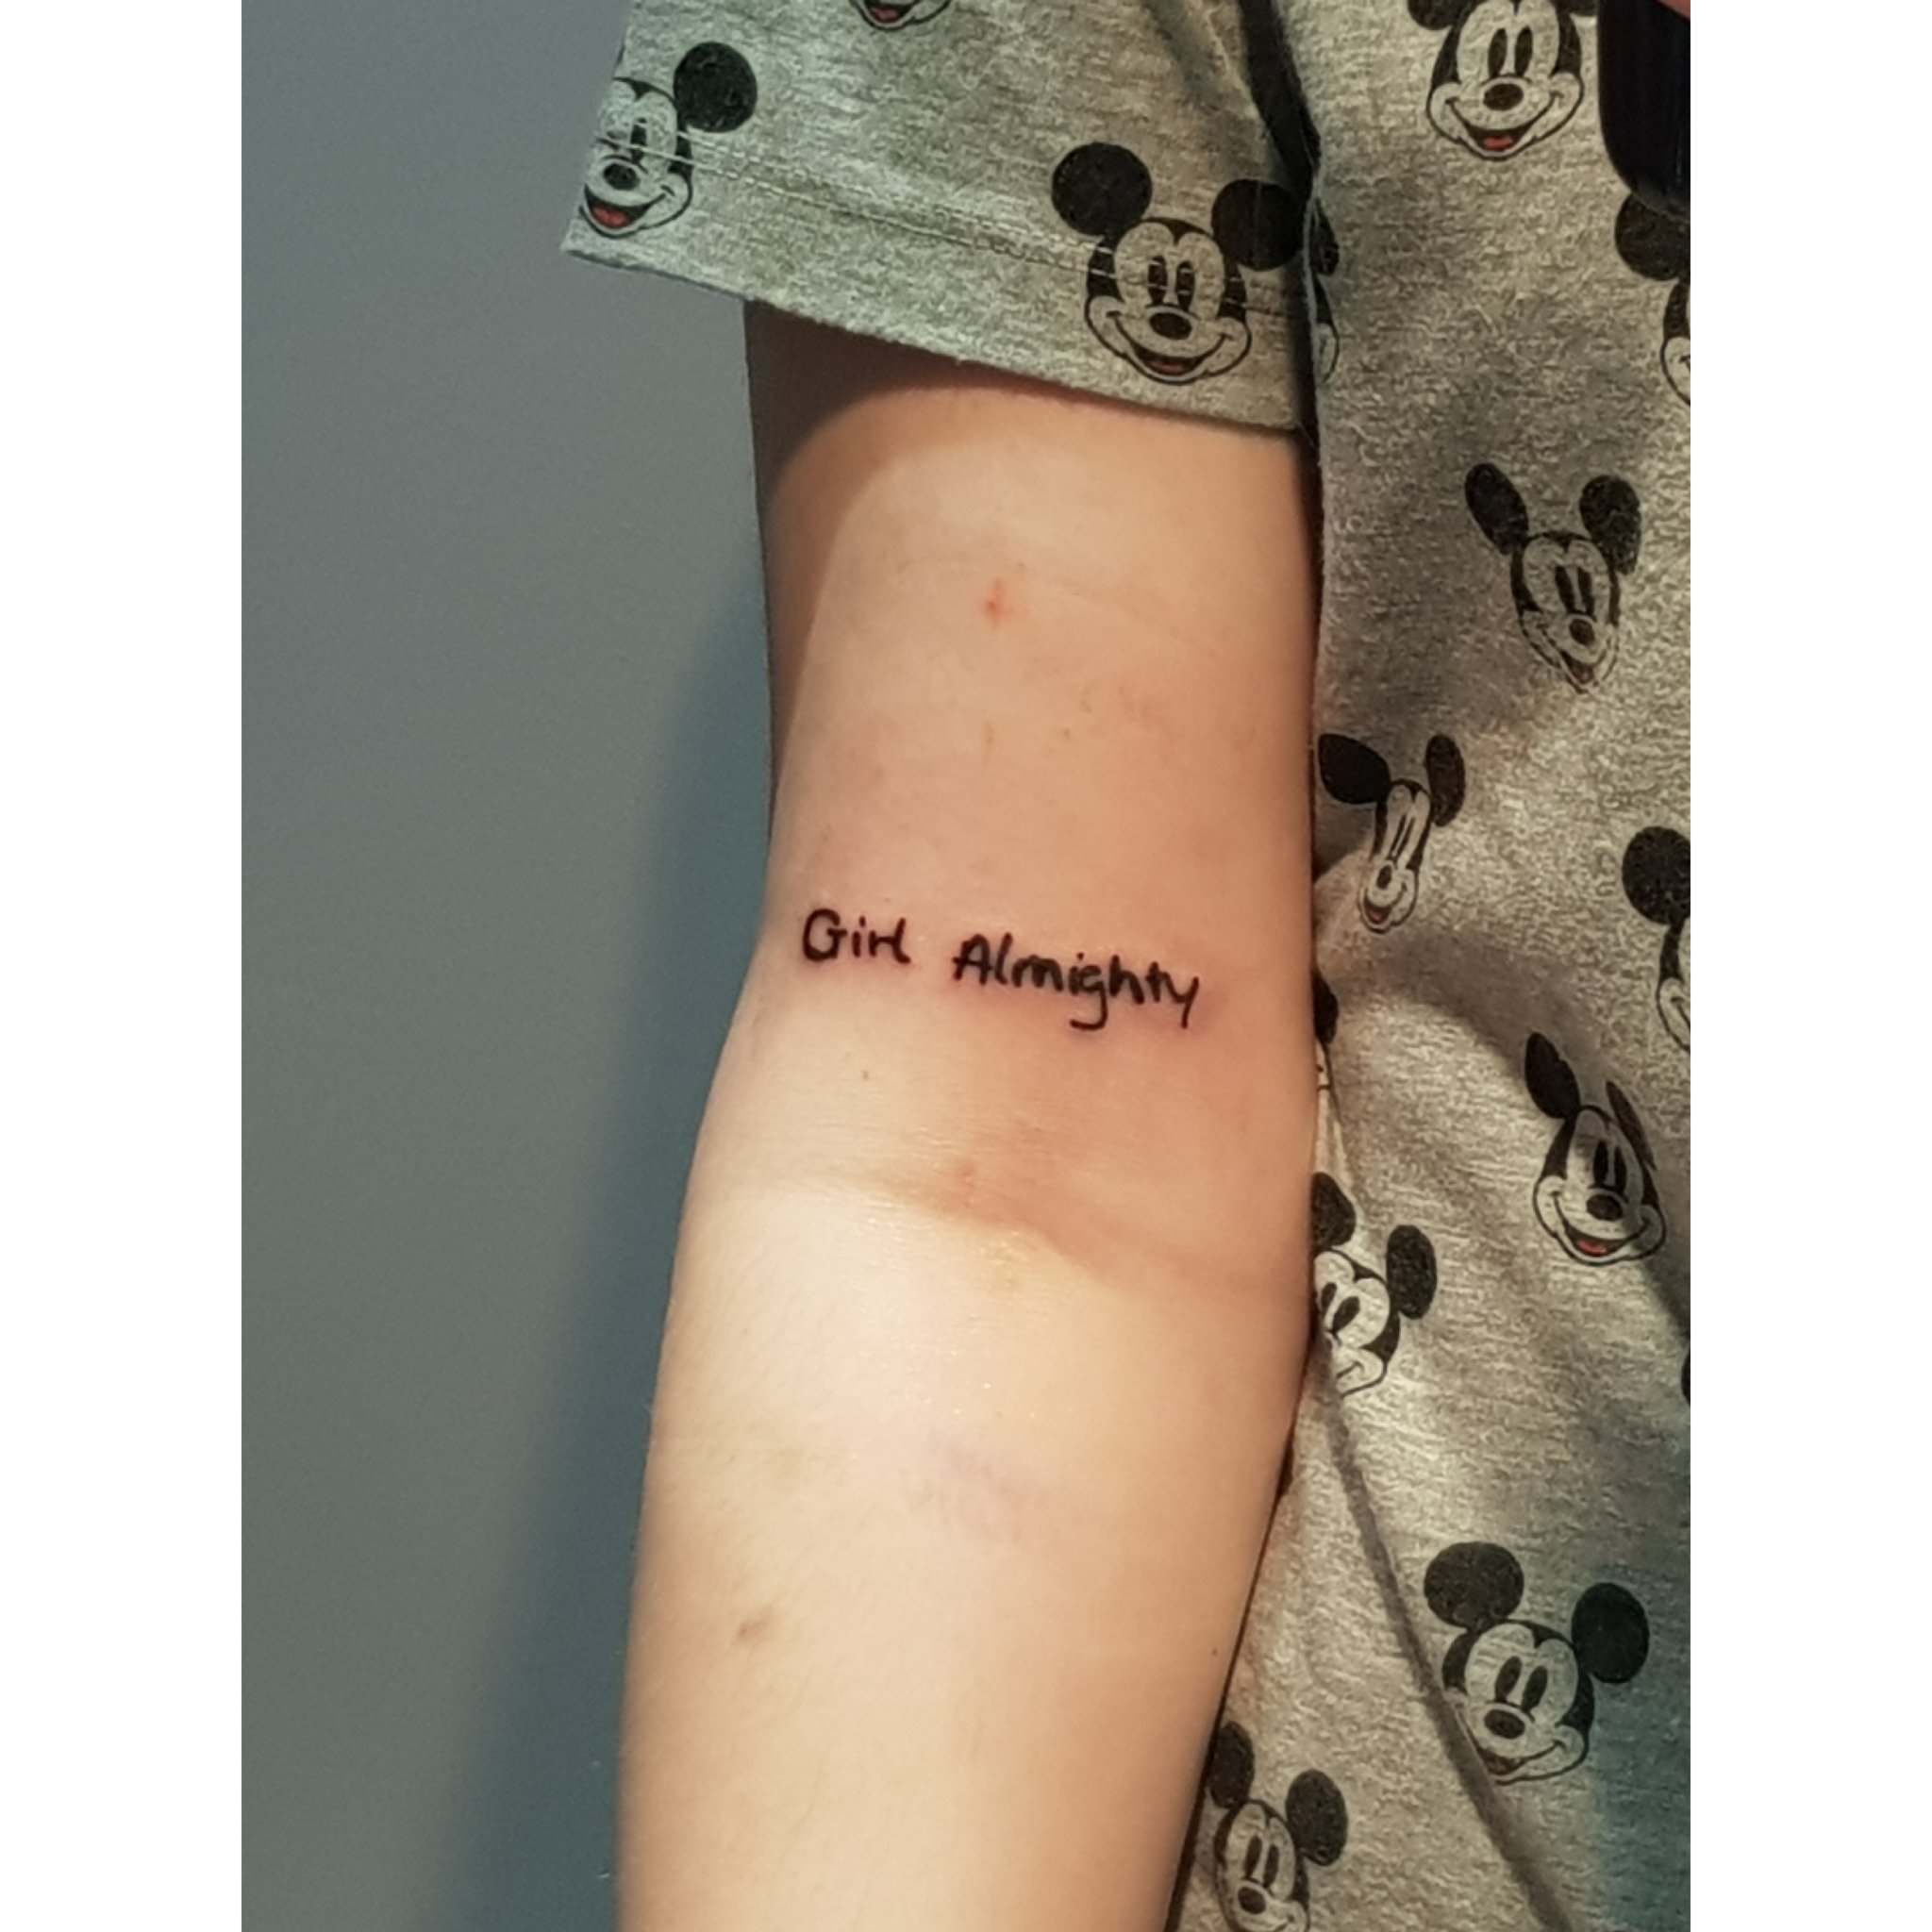 imogen ◟̽◞̽ on X: 27/3/2018 i finally met Niall and it was honestly the  happiest day of my life 💕 i asked him to write out girl almighty for my  tattoo and